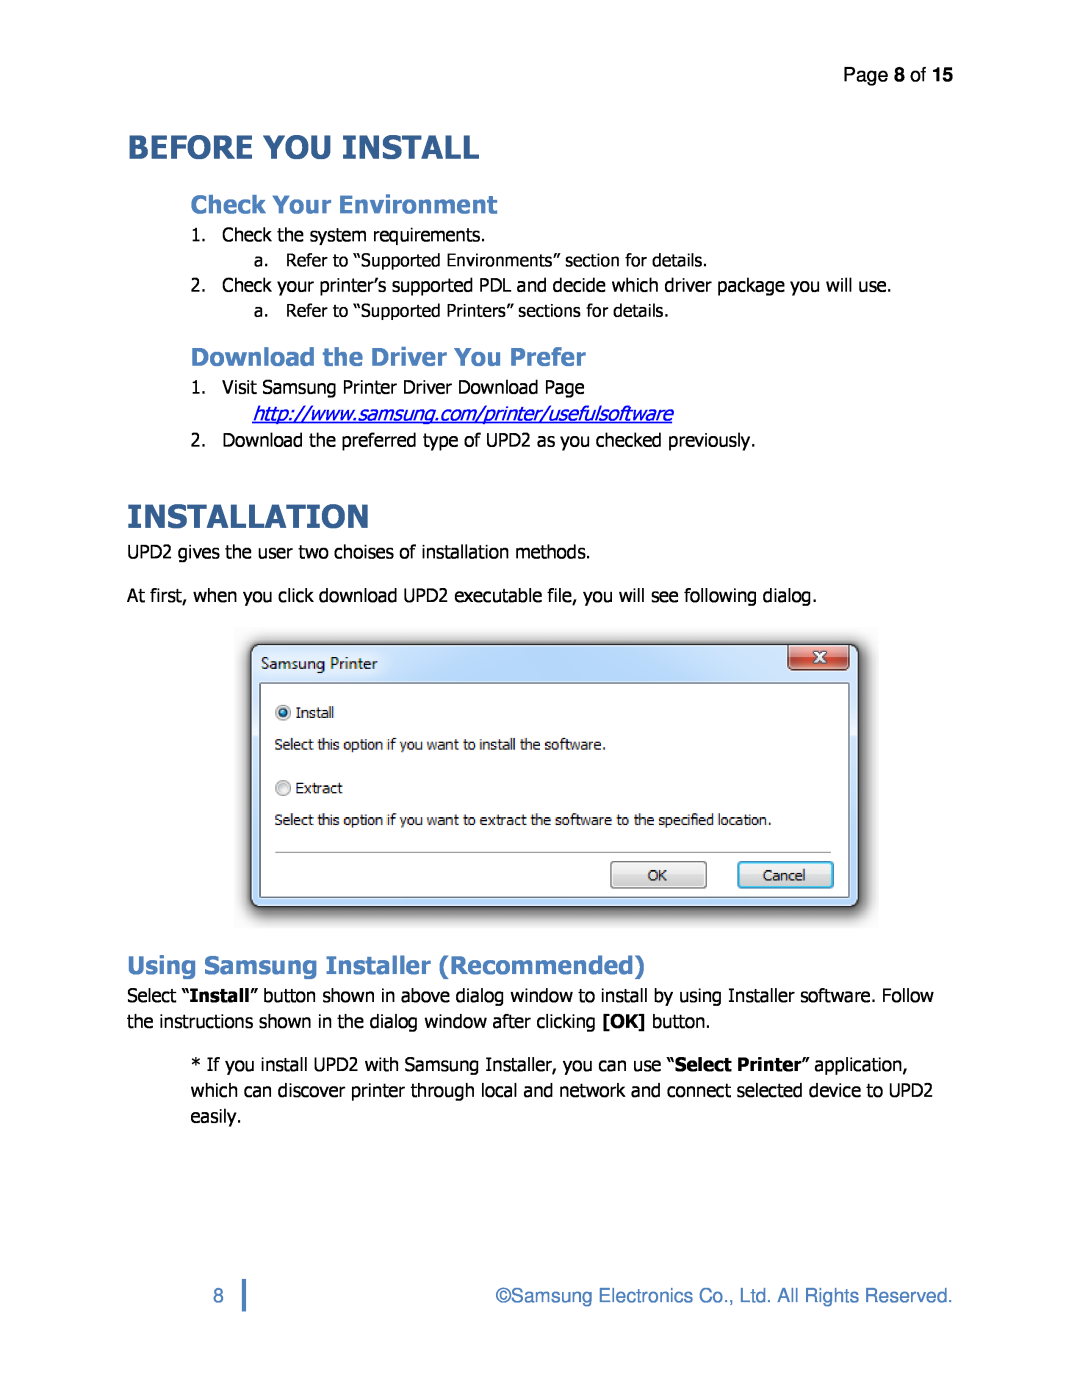 Samsung SLM3870FW Before You Install, Installation, Check Your Environment, Download the Driver You Prefer, Page 8 of 